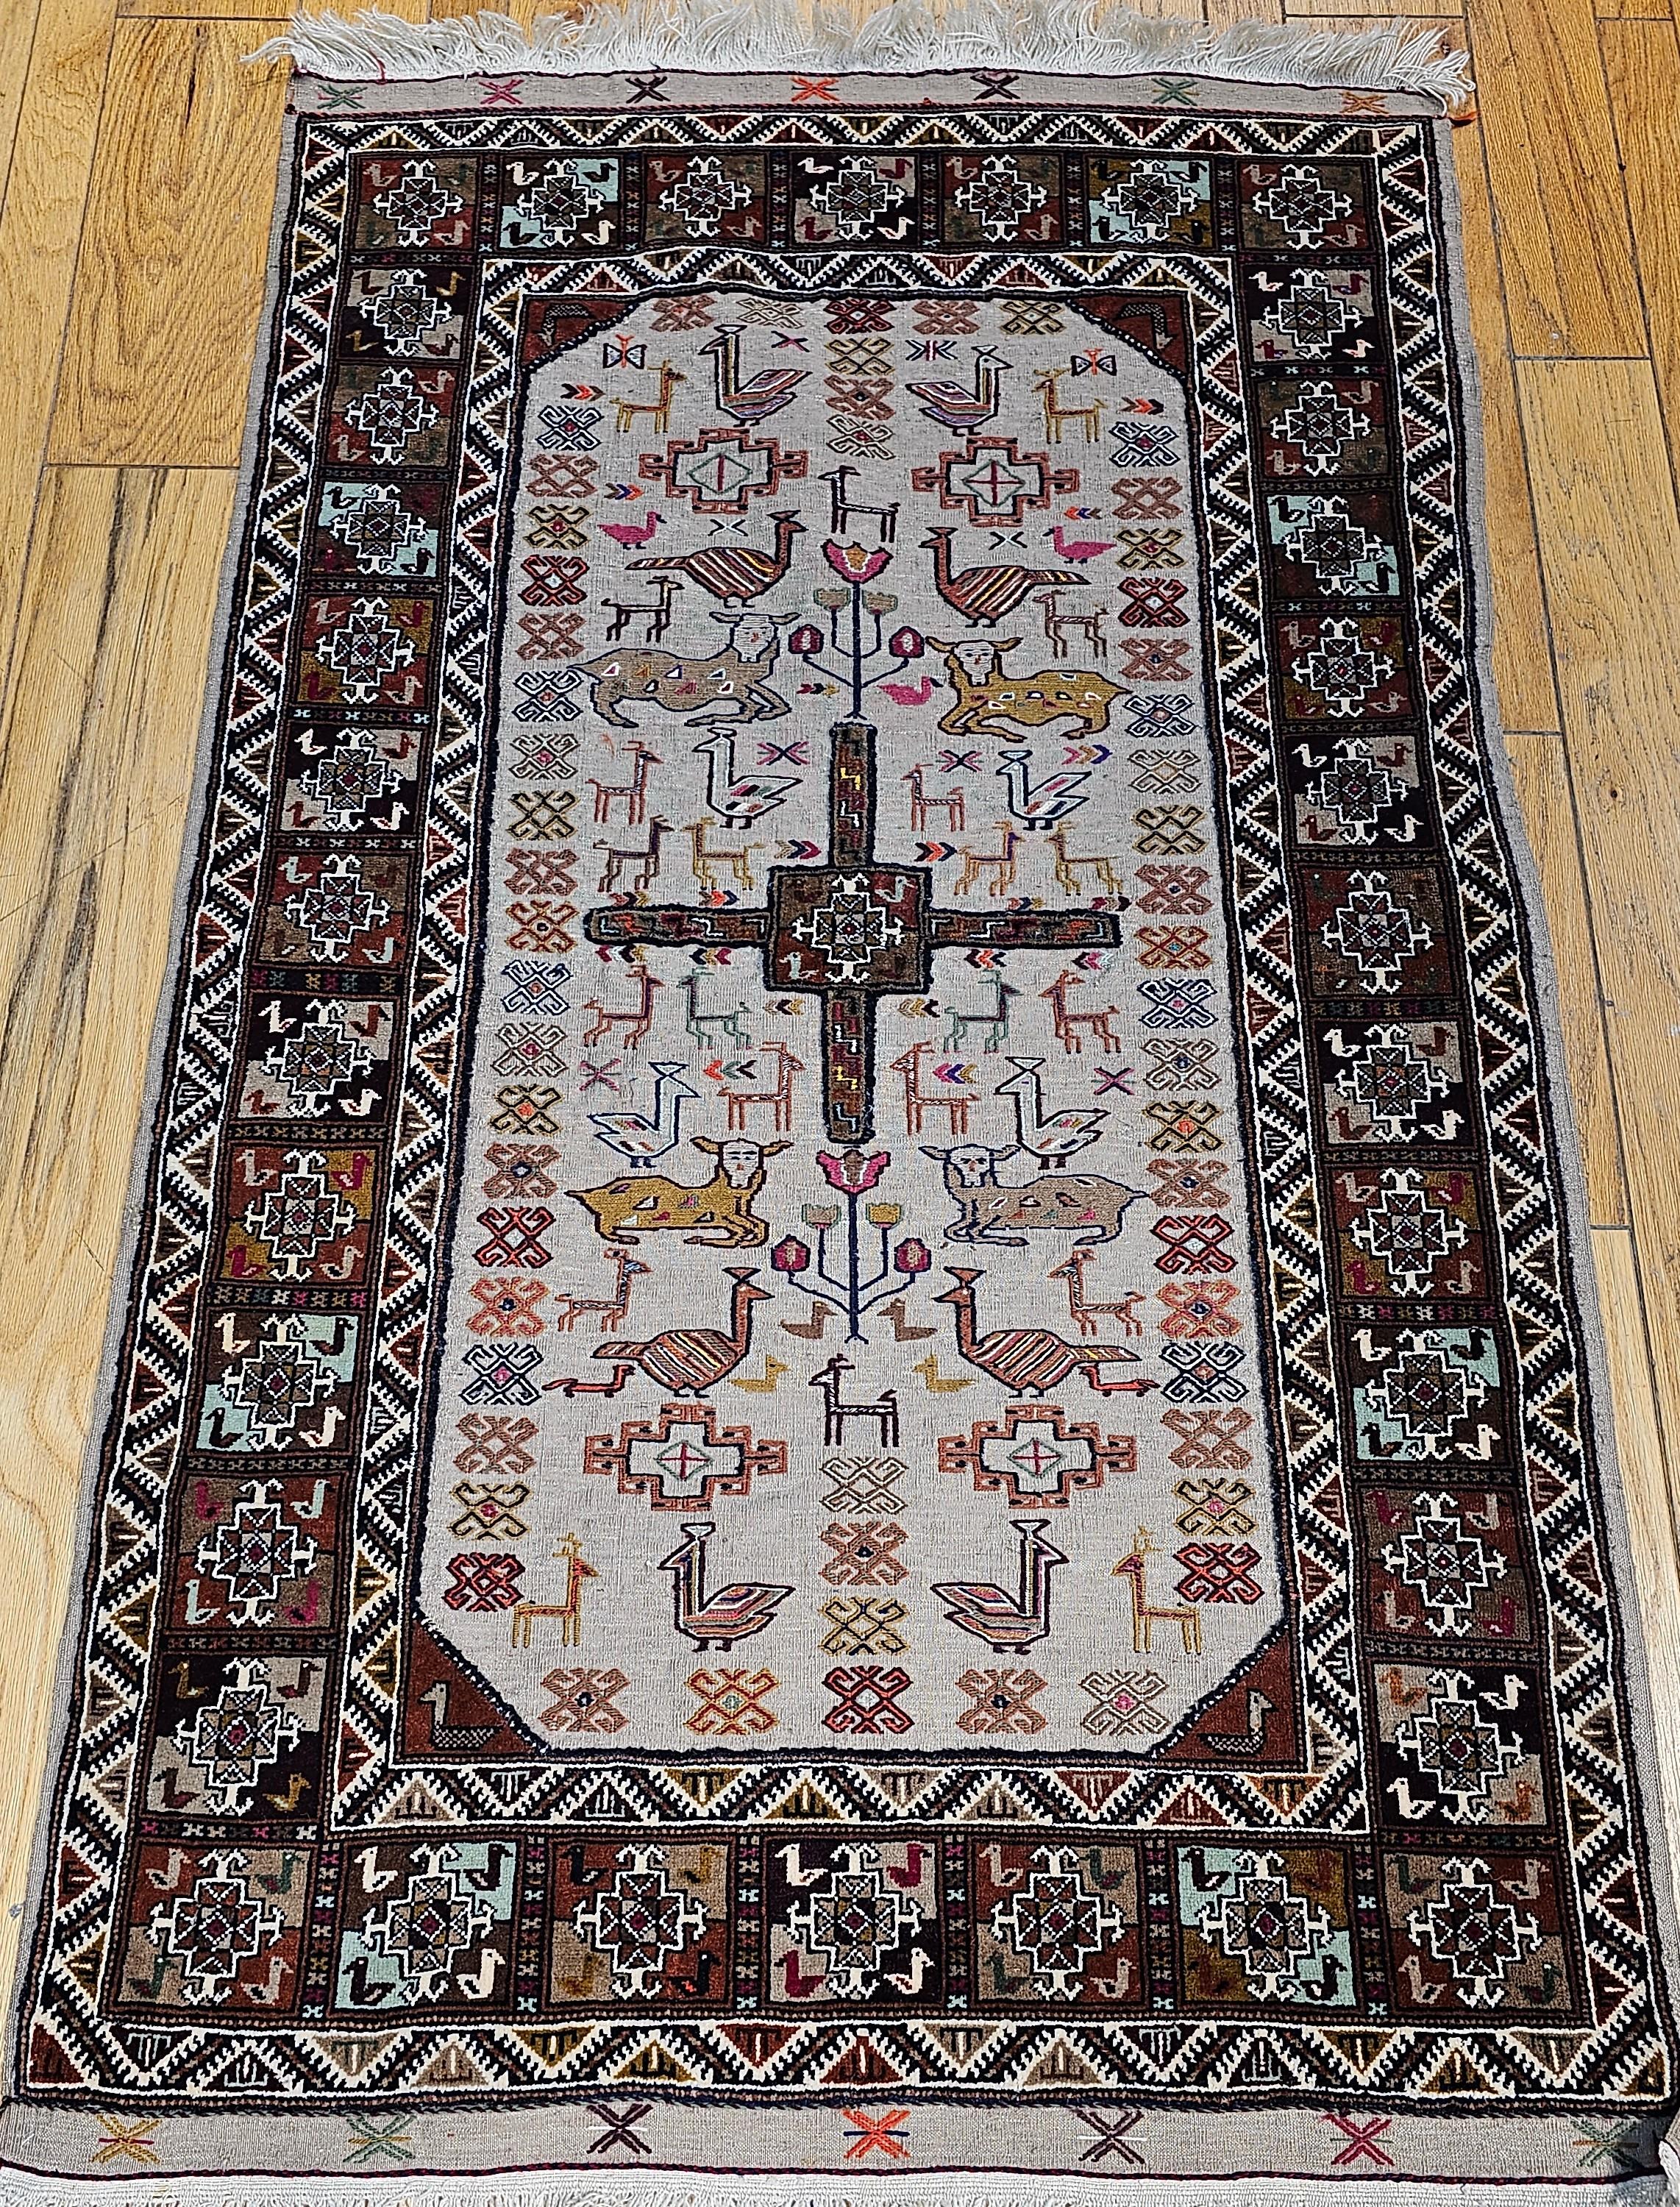 Extremely rare and very collectable Qashqai tribal tapestry hand-woven rug in the “Tree of Life” pattern. This tapestry rug is unique in several ways.  First there are two  different woven techniques used in the creation of this tribal art.  The